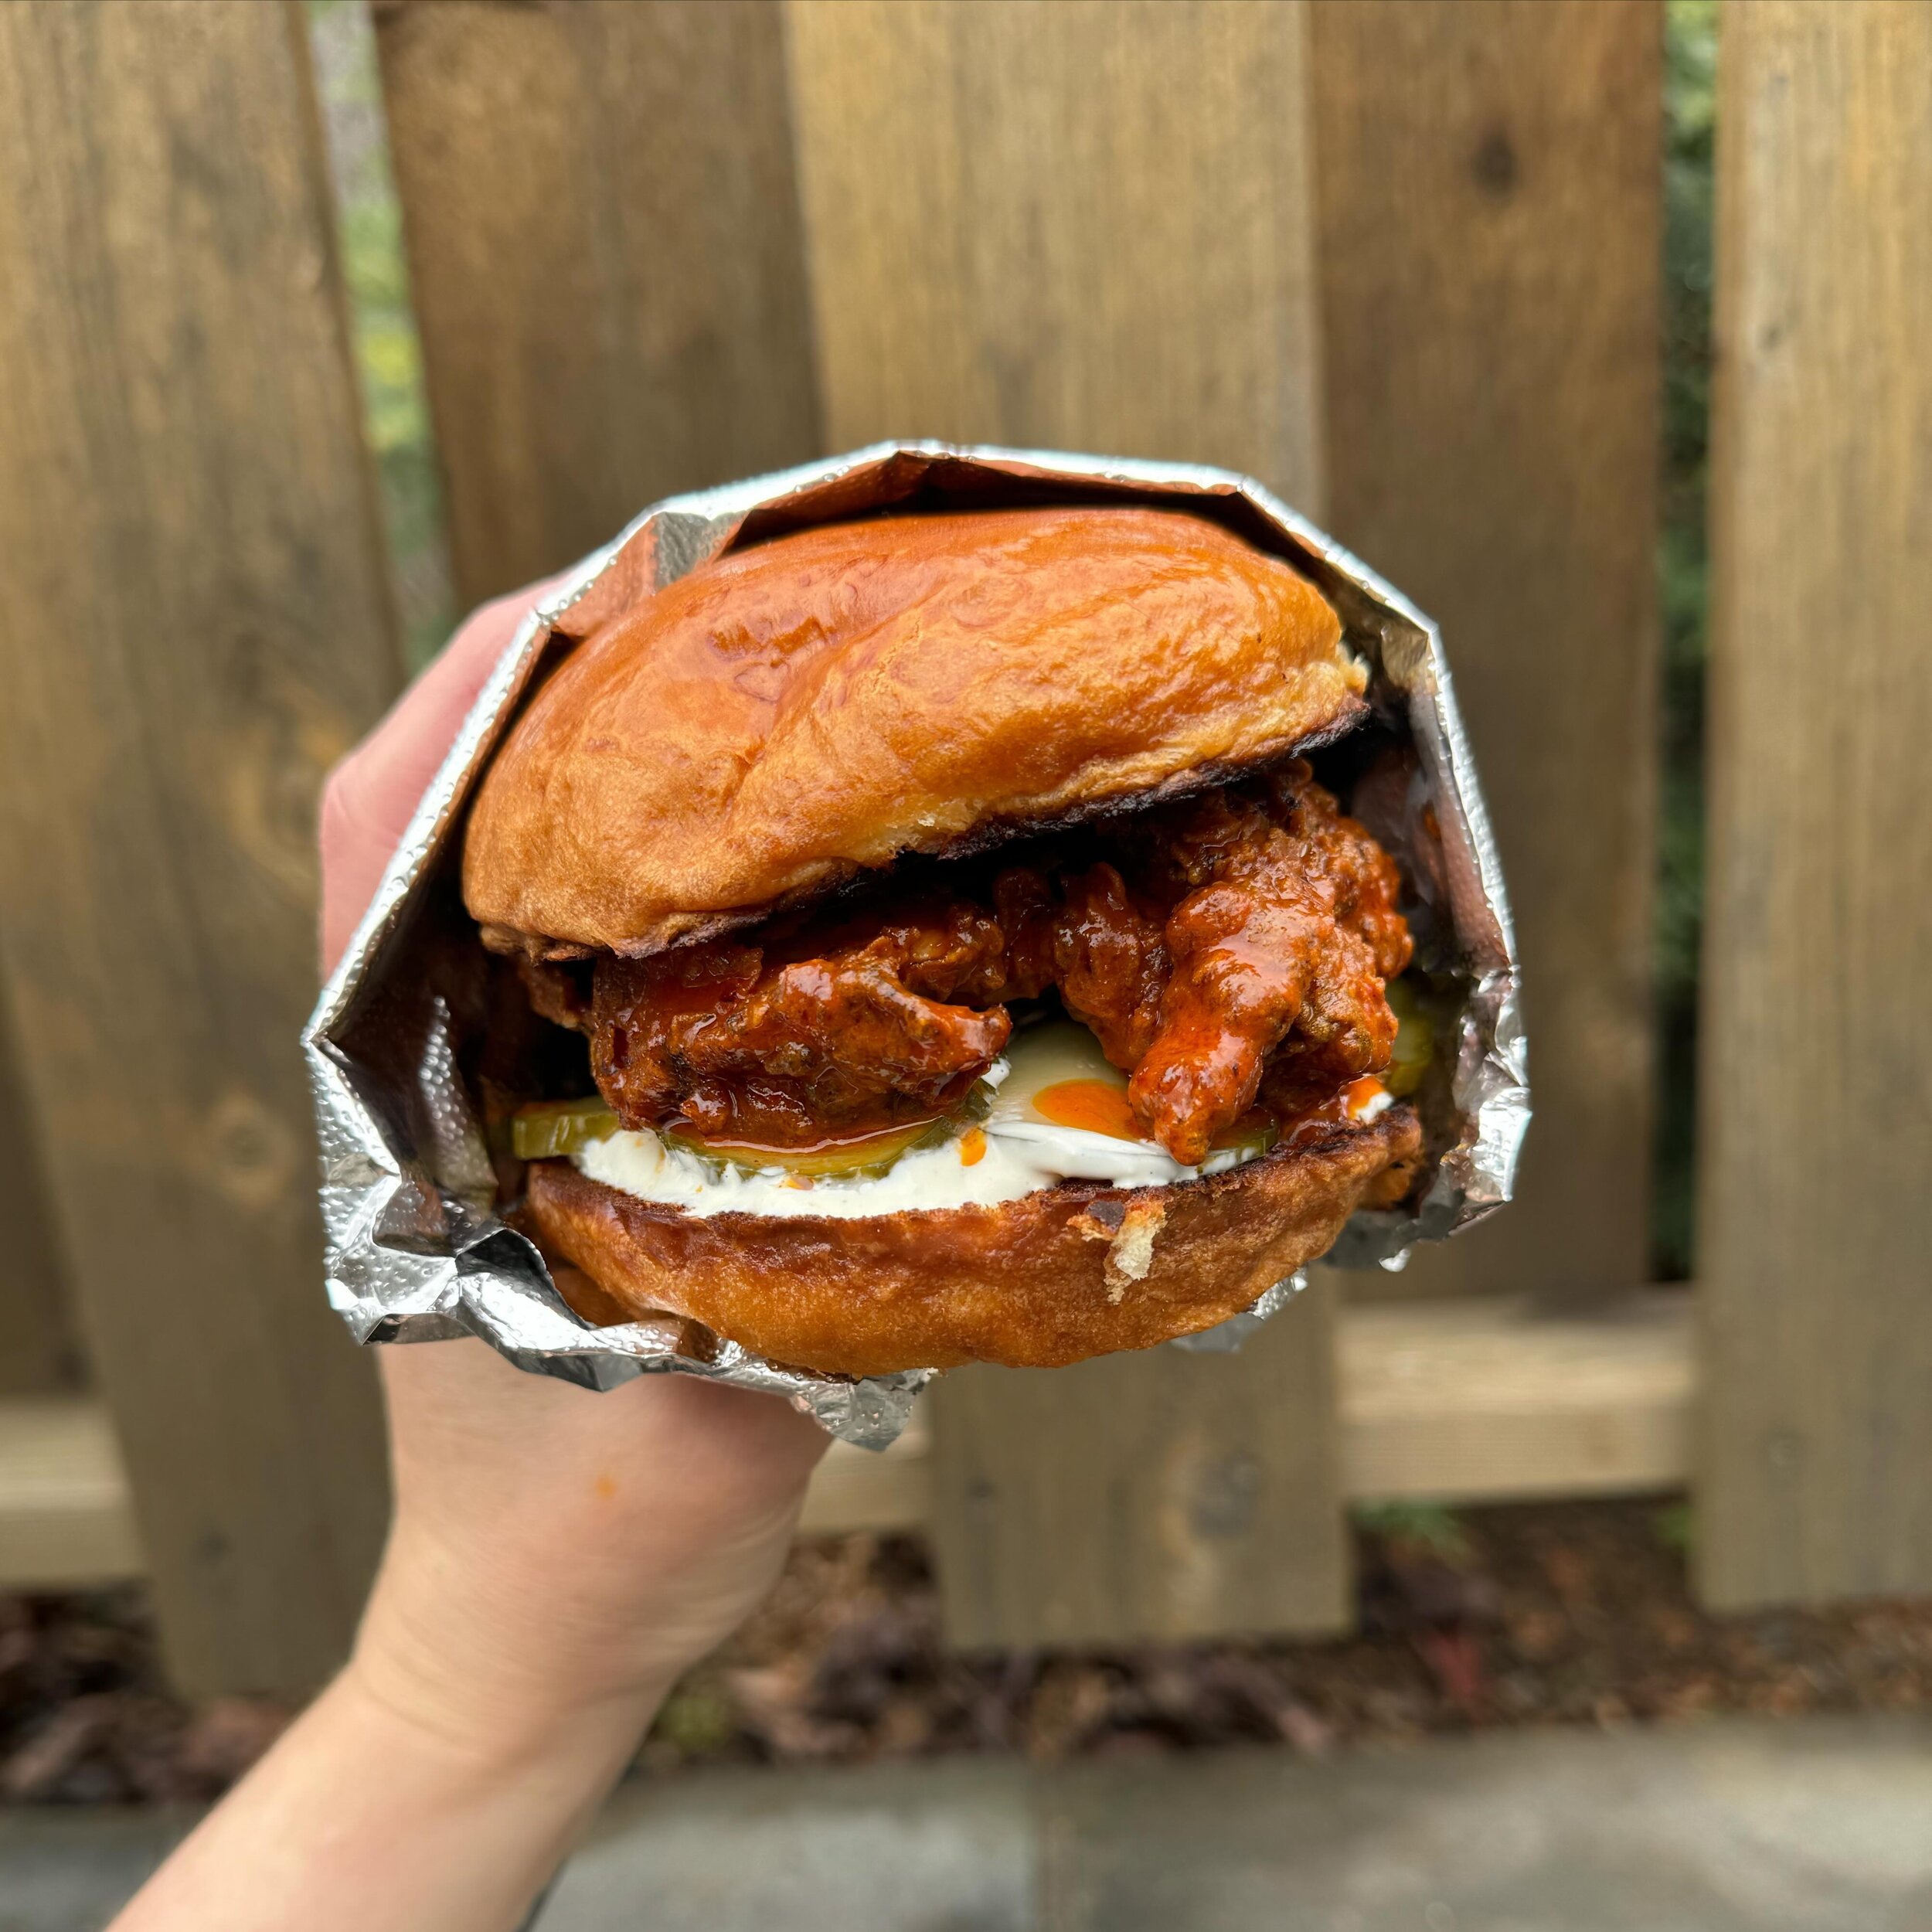 Small change to our hot sandwich special today!

We have a buffalo fried chicken sandwich with pickles and blue cheese dressing on toasted brioche! Available today and tomorrow till 3pm.

We&rsquo;ll have the b&aacute;nh m&igrave; from the news lette